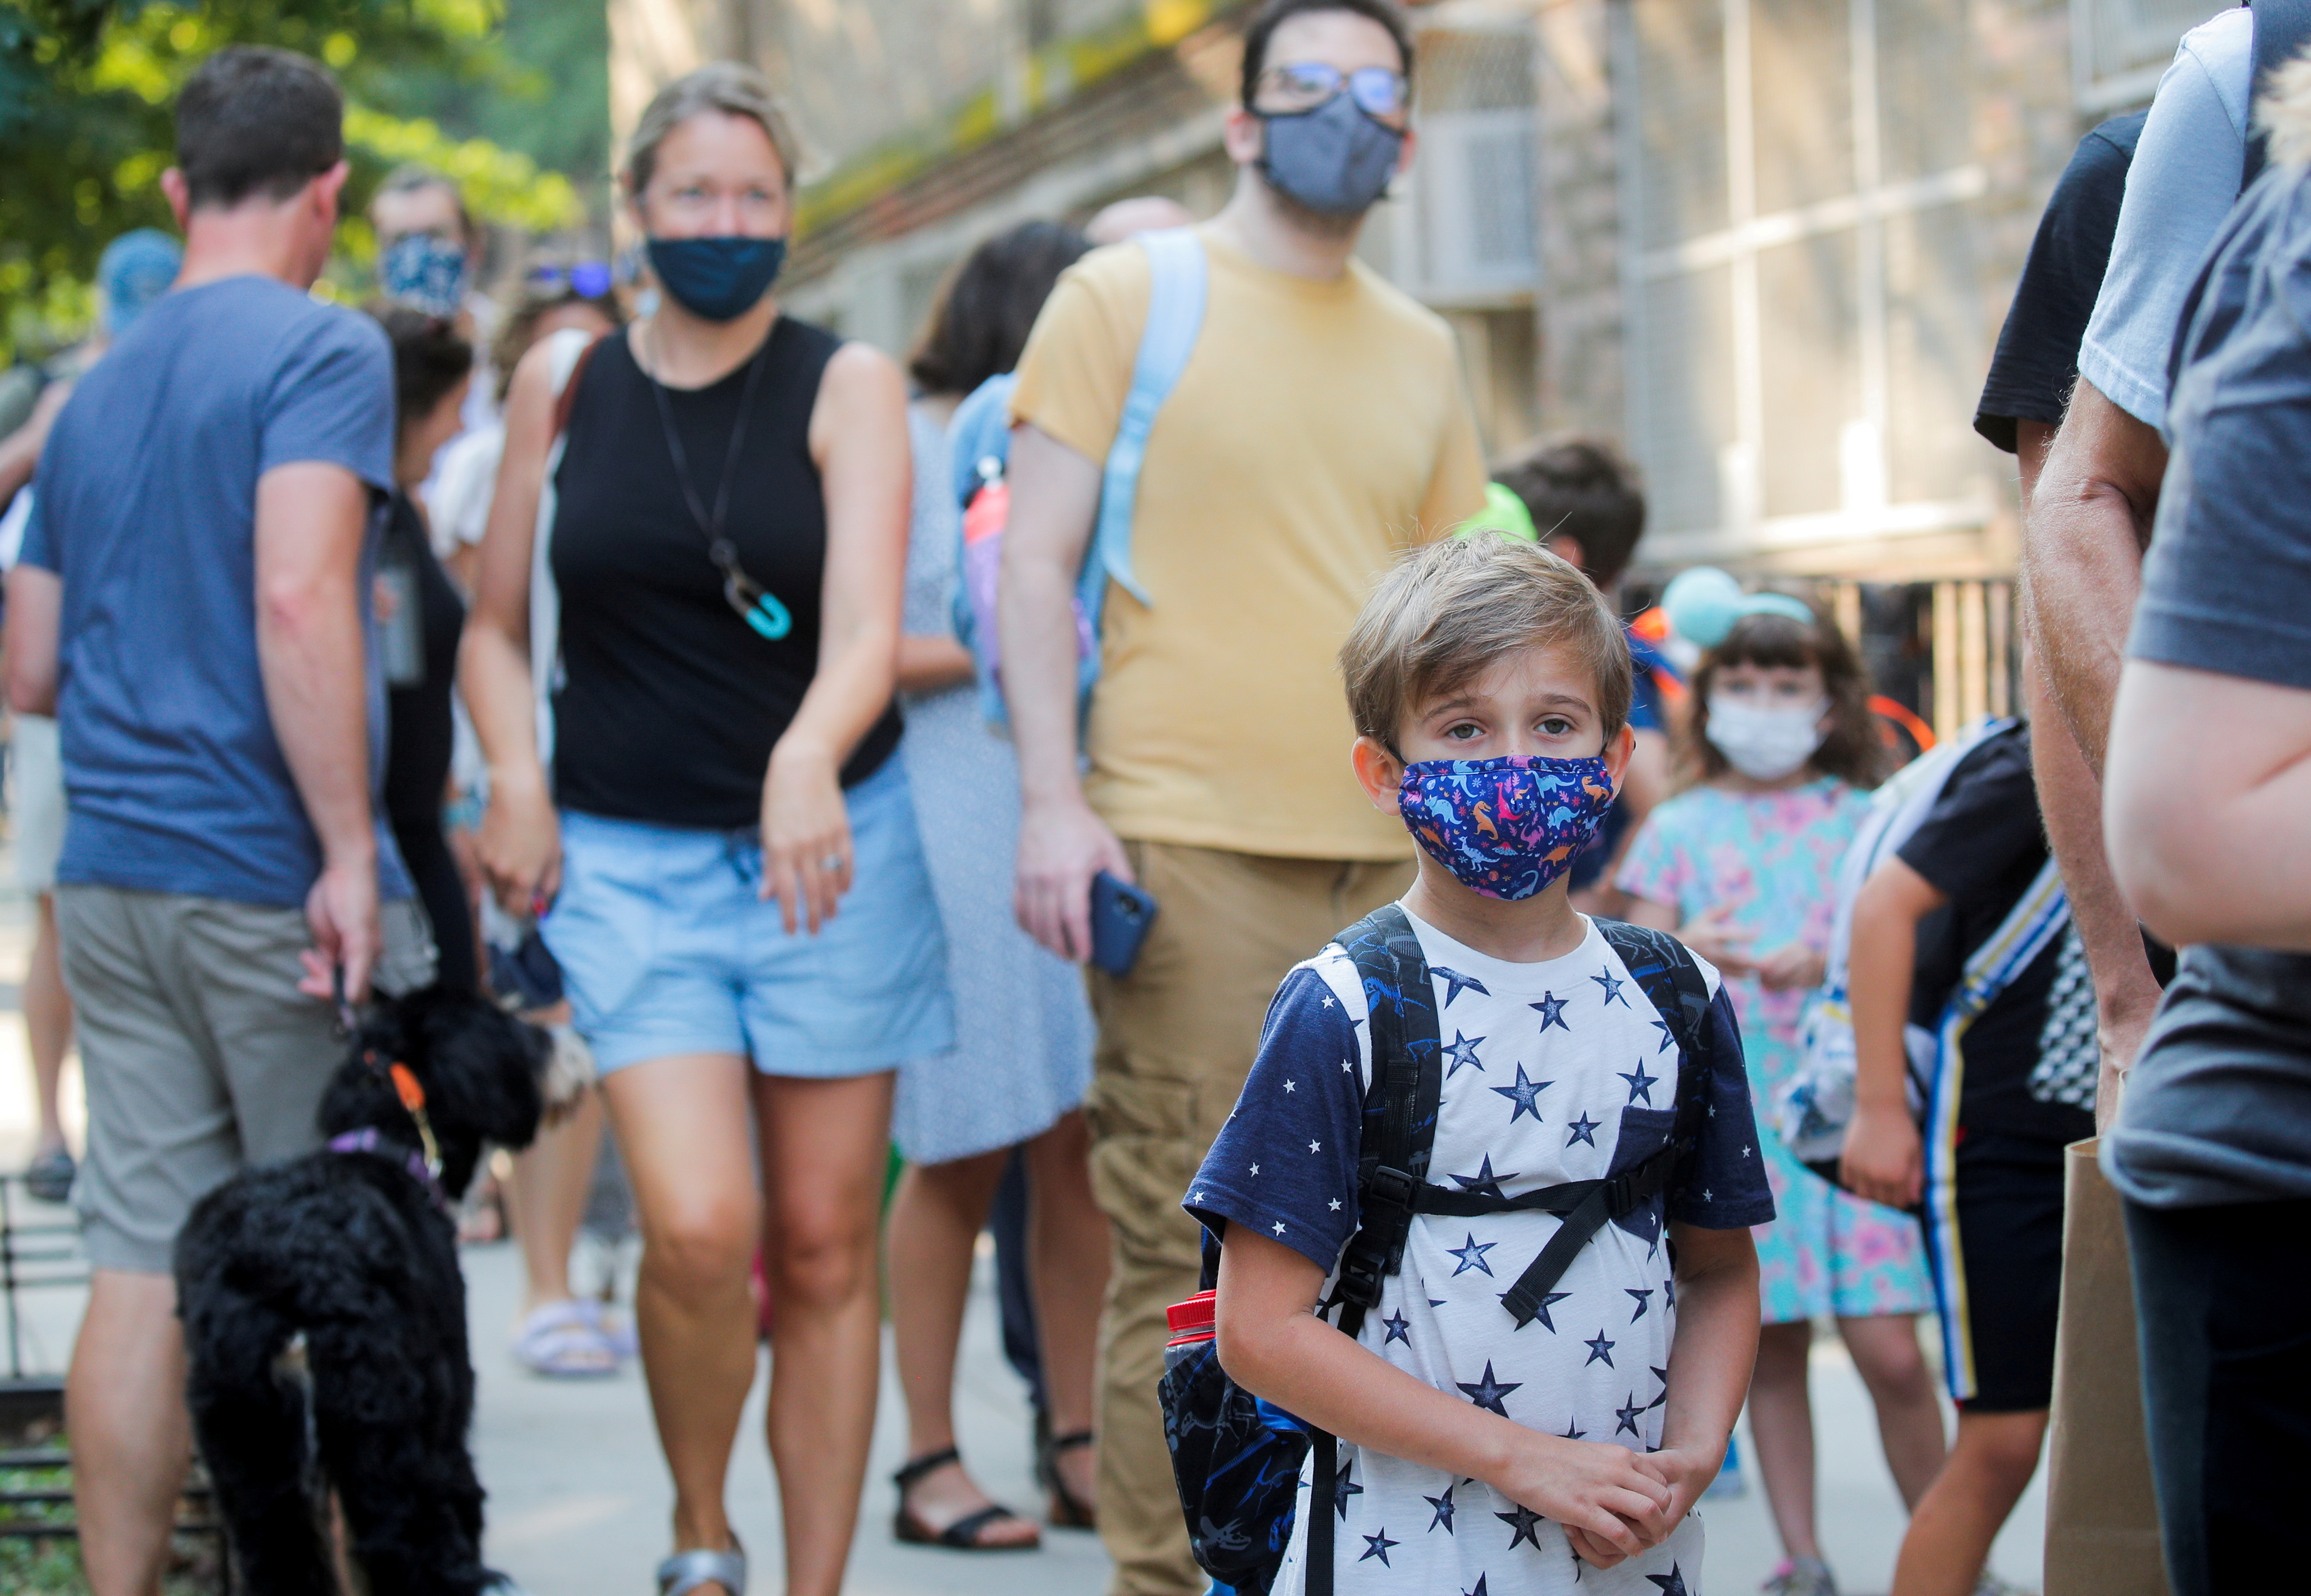 A child wears a face mask on the first day of New York City schools, amid the coronavirus disease (COVID-19) pandemic in Brooklyn, New York, U.S. September 13, 2021. REUTERS/Brendan McDermid